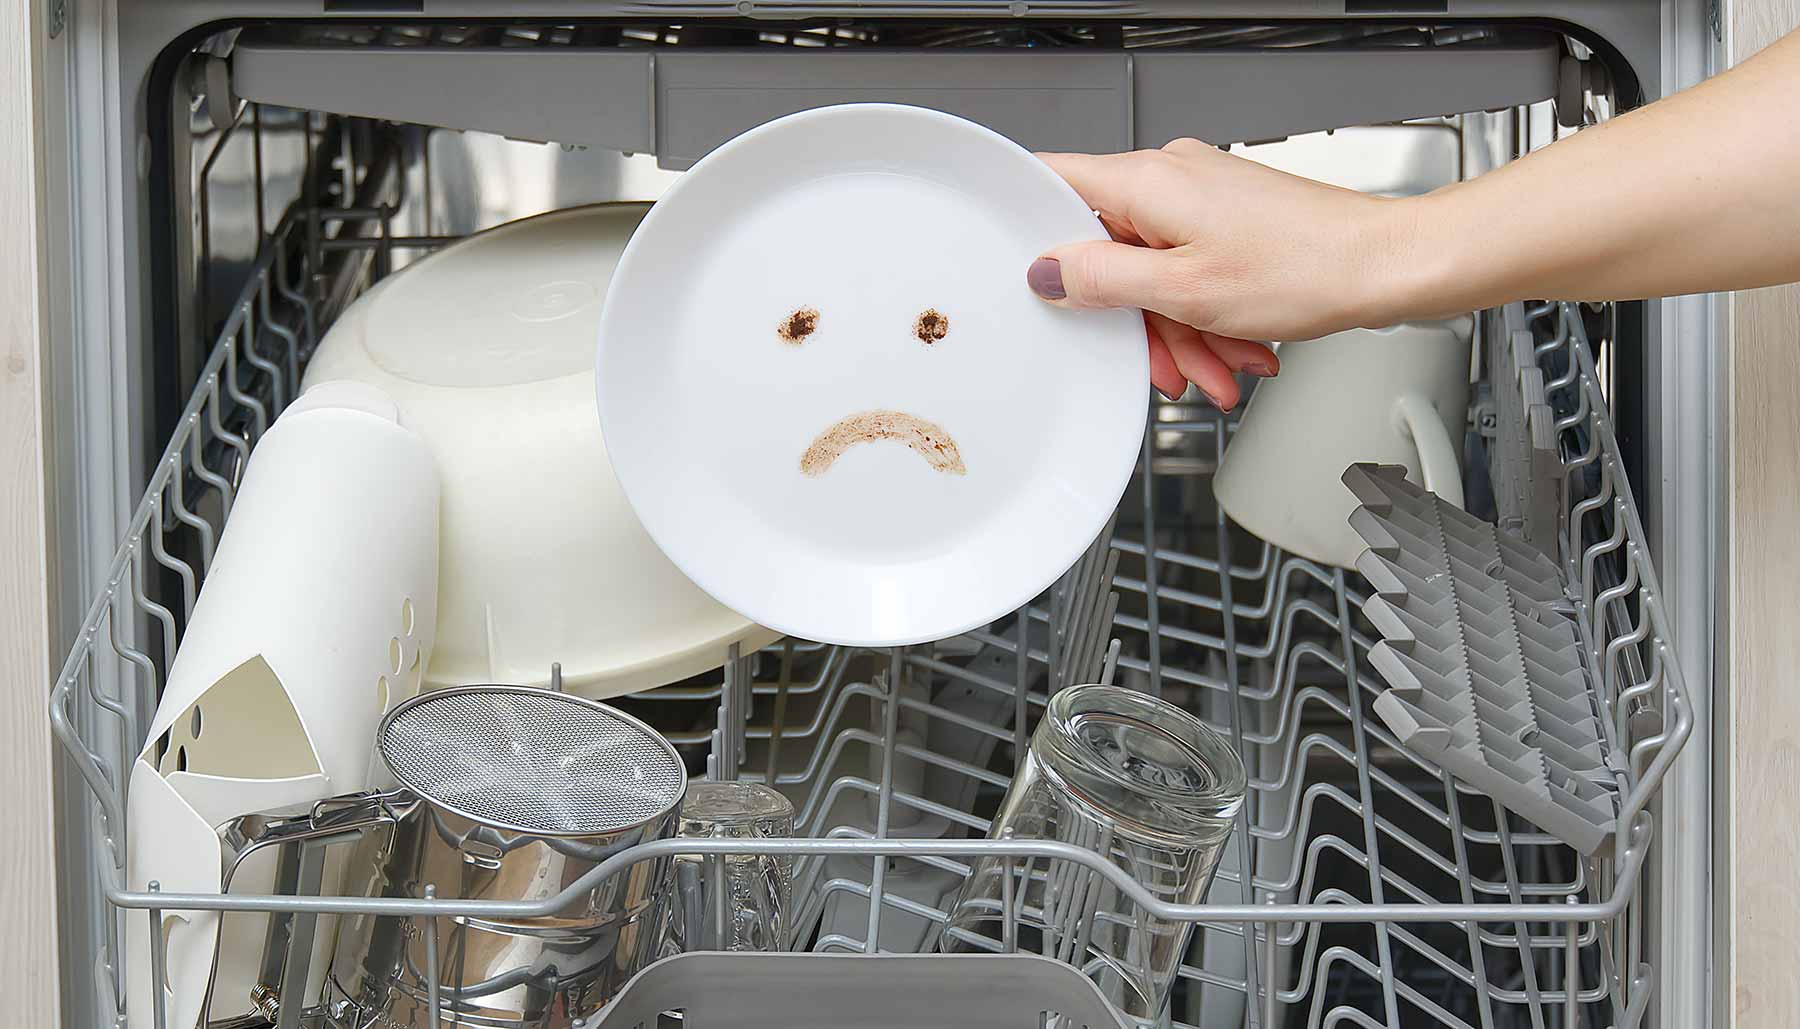 loading the dishwasher, plate with sad face